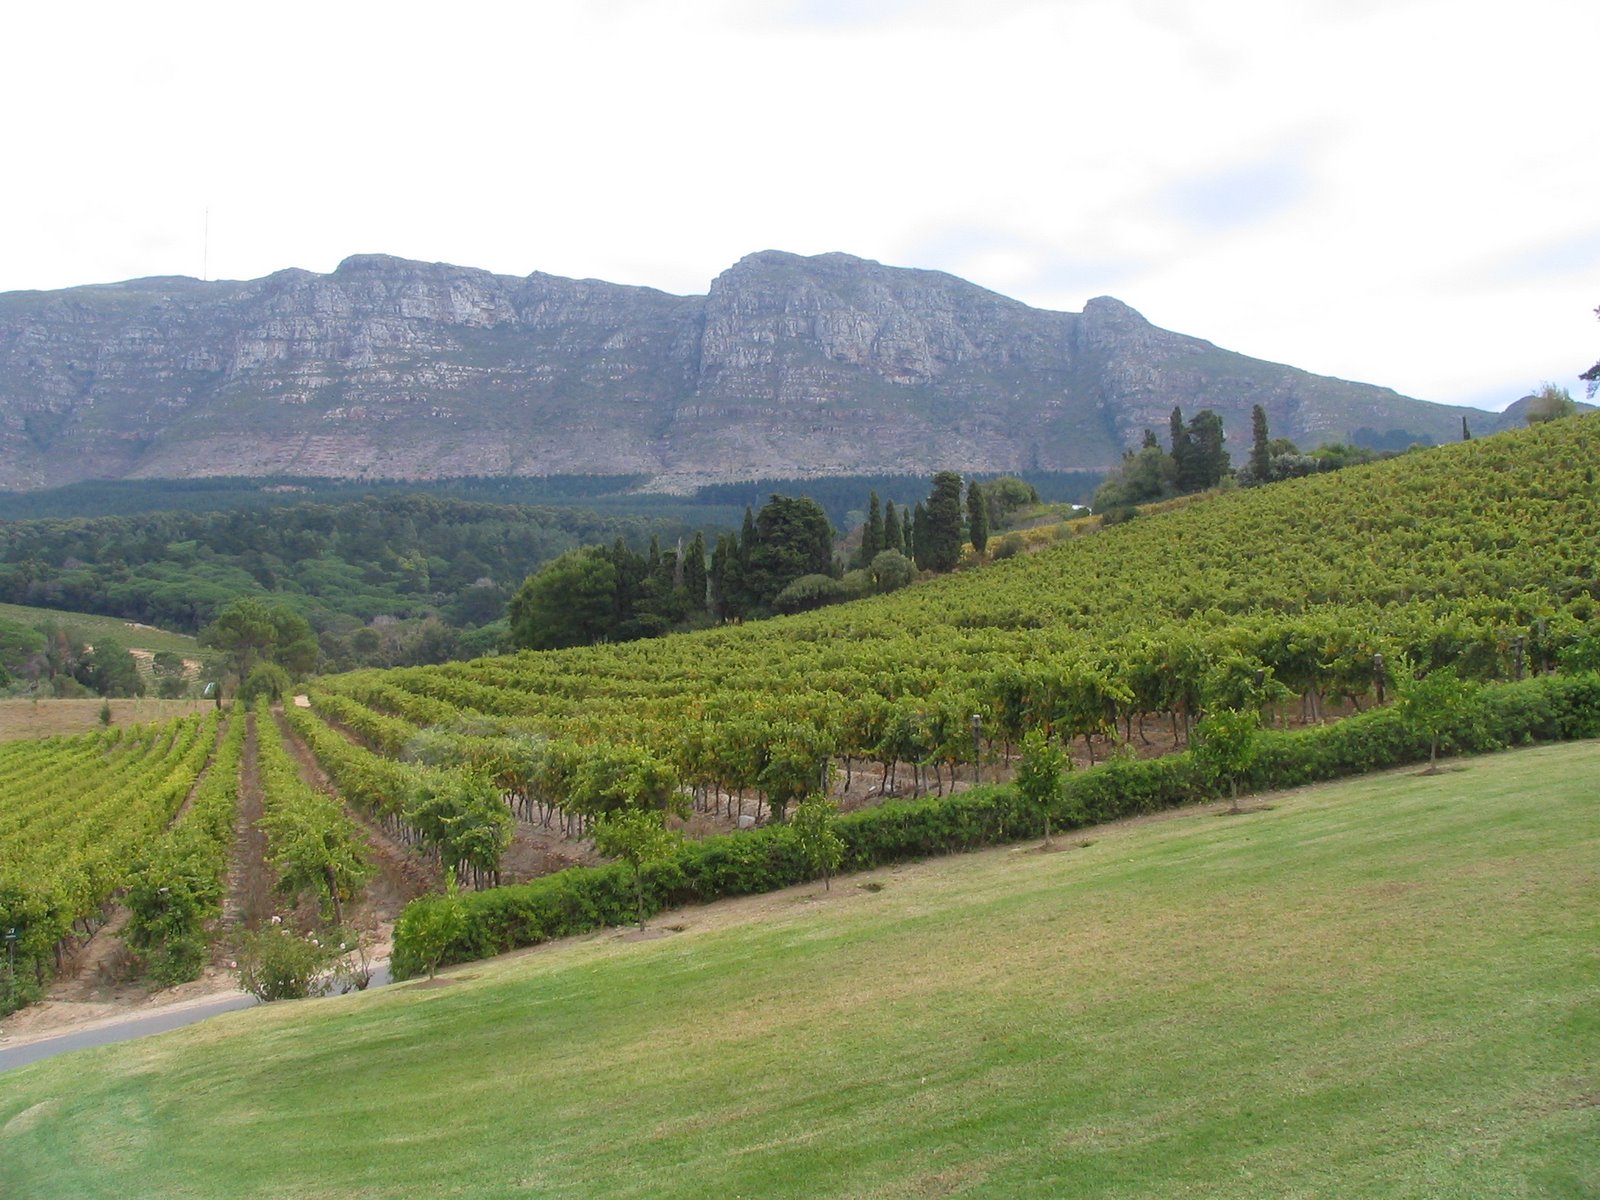 [015+Vineyards+and+Mountains+in+Winelands+Area+Near+Capetown.jpg]